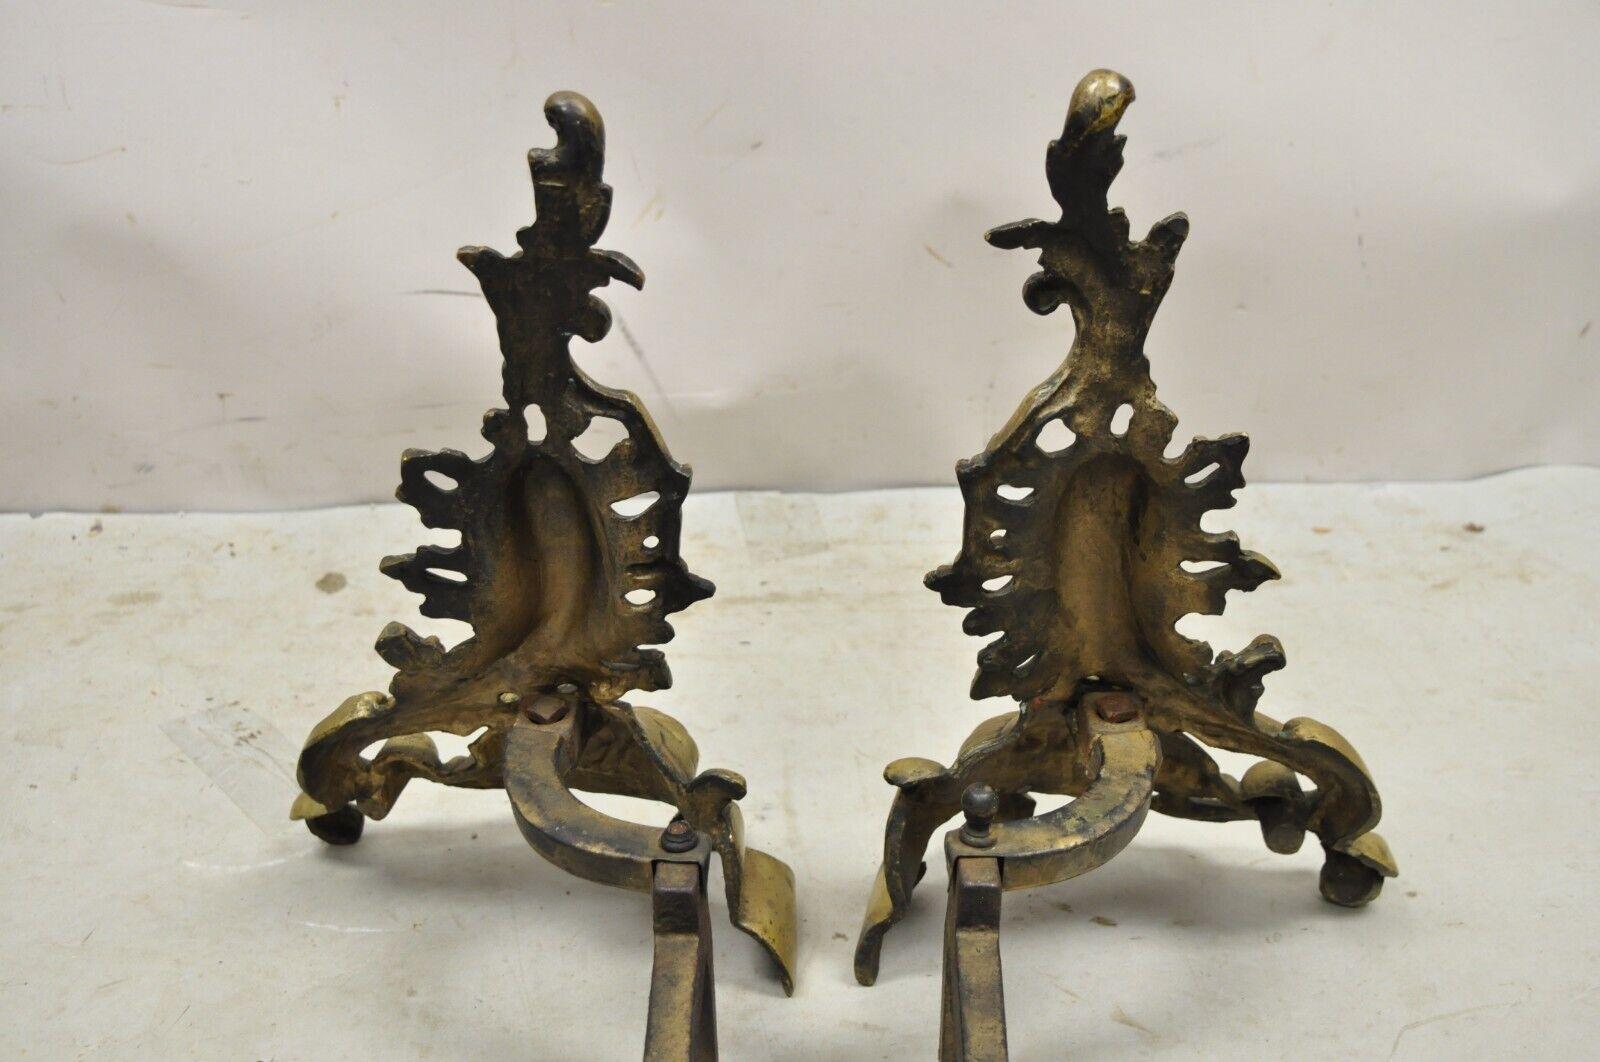 Antique French Rococo Baroque Style Brass Leafy Acanthus Andirons - a Pair For Sale 5